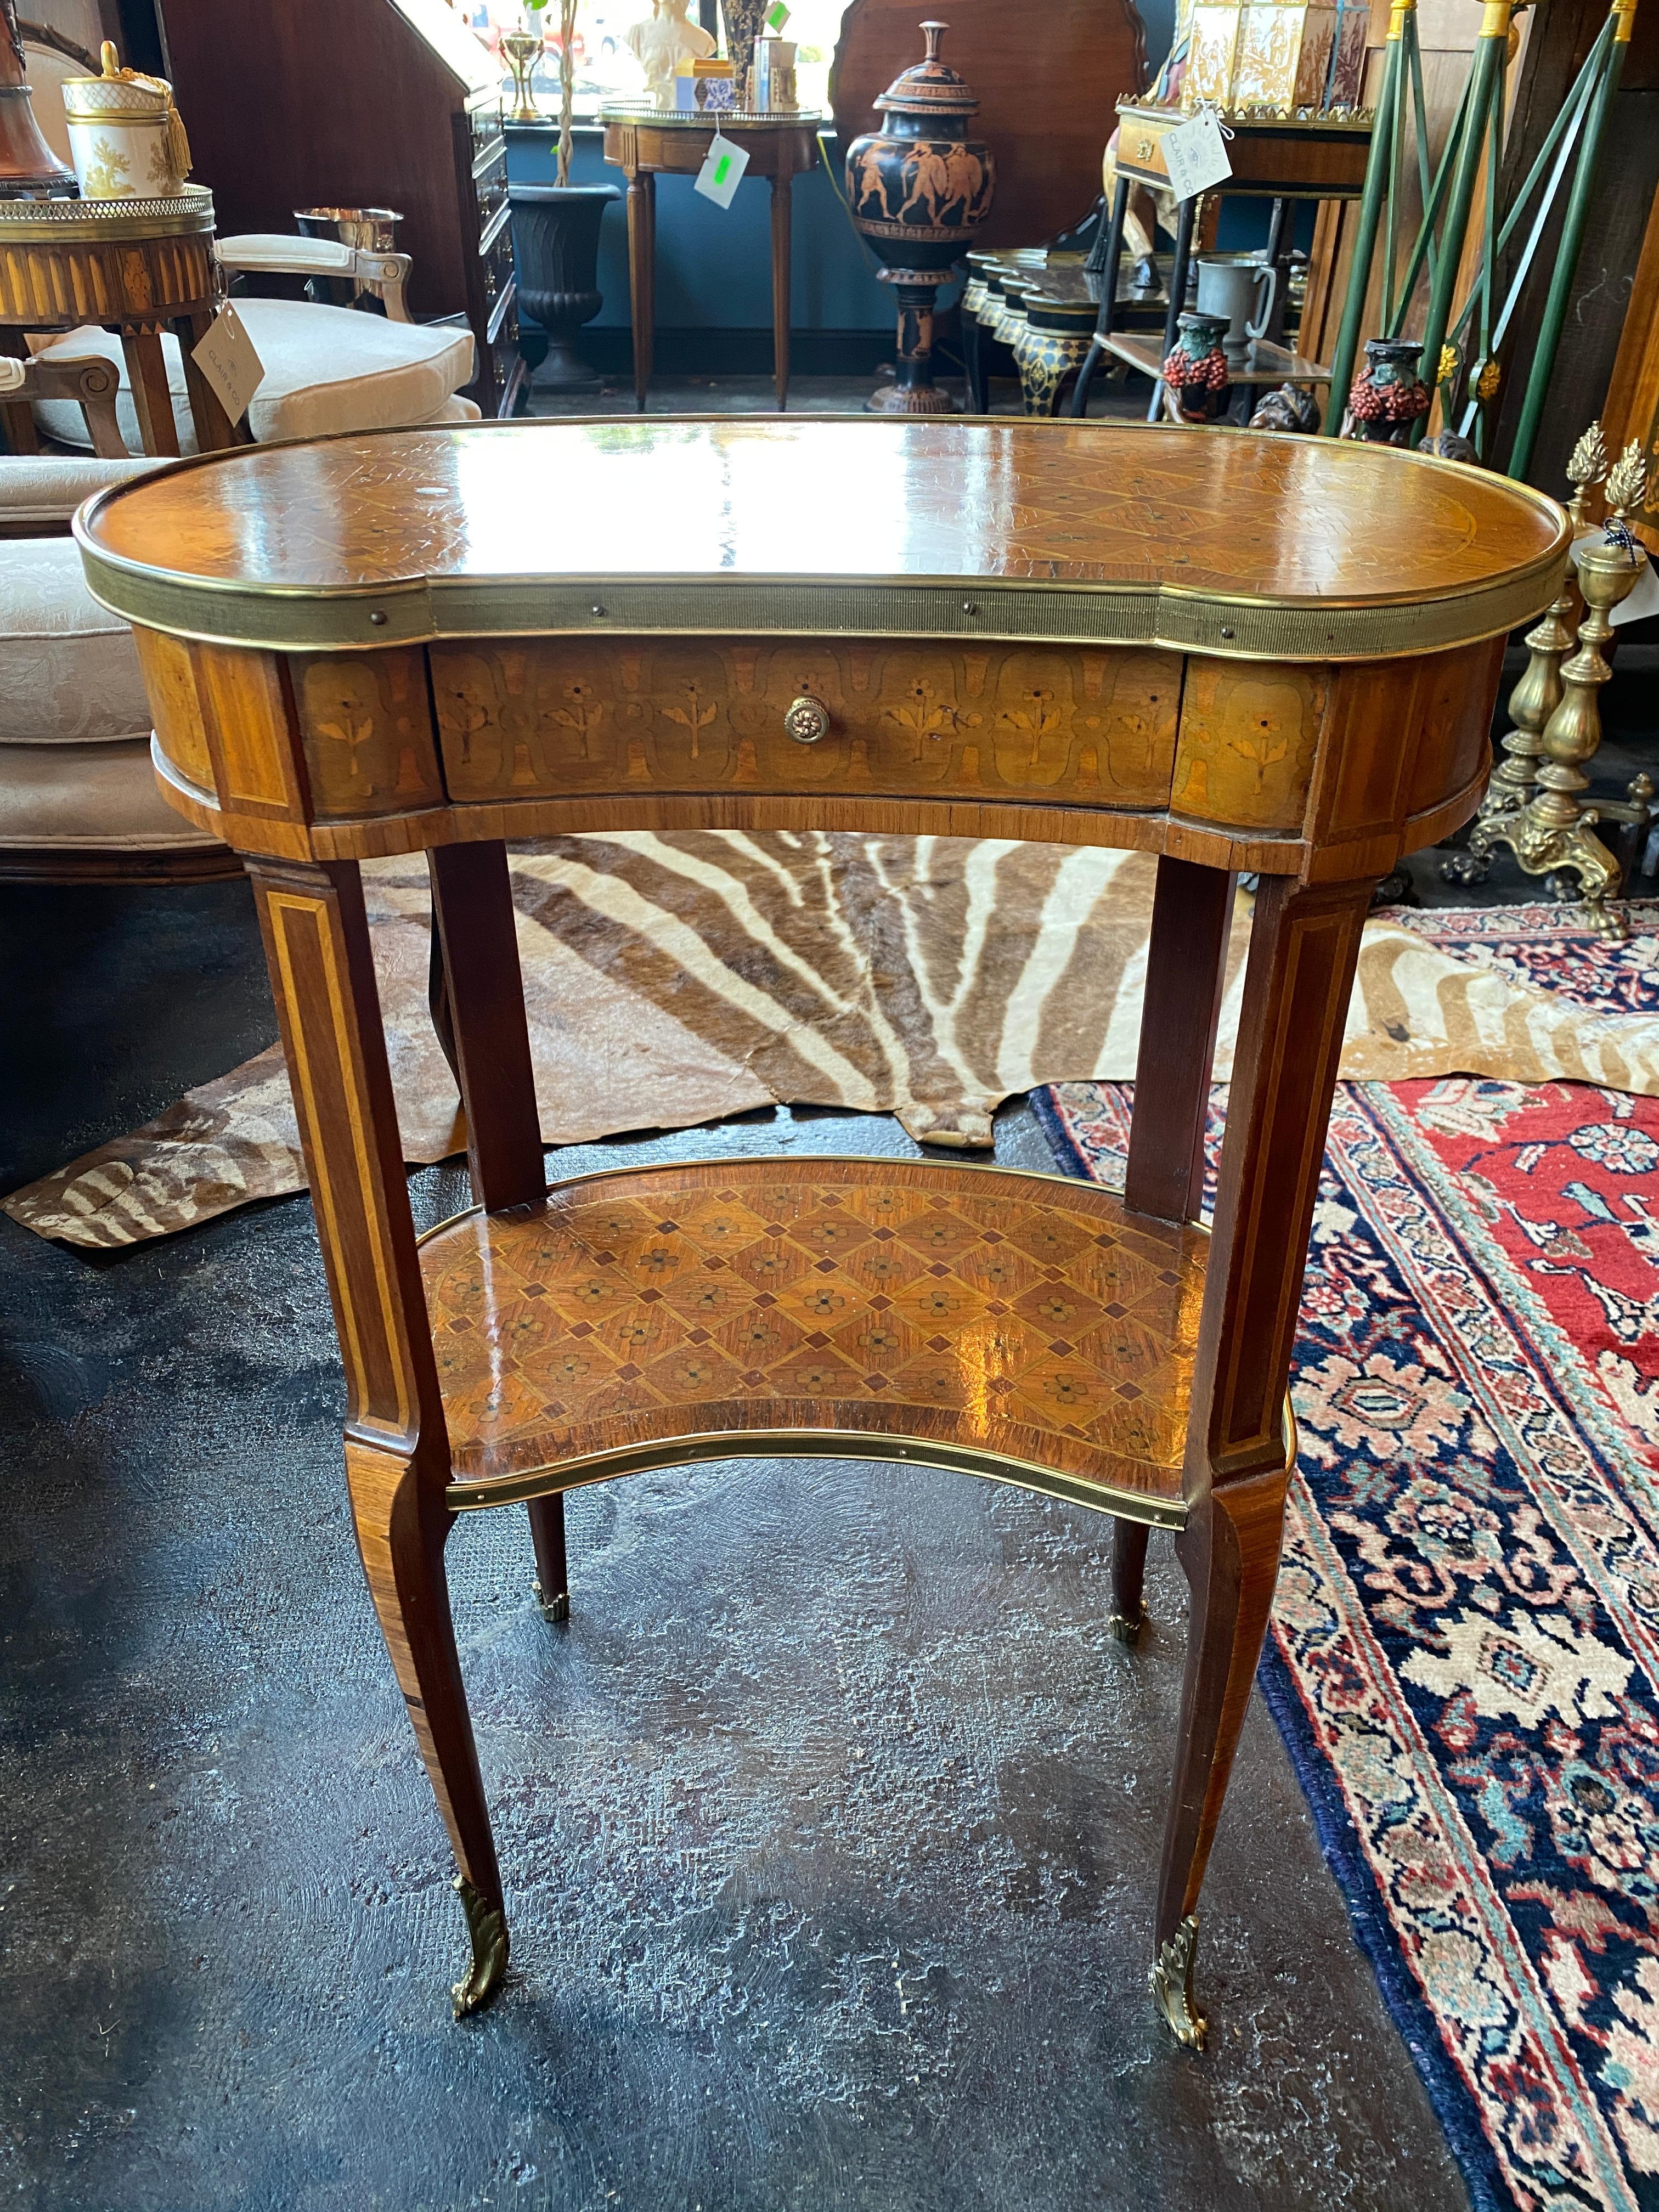 19th century French Louis XVI style kidney shaped side table with one drawer. Brass galleries and sabots. One brass pull in the center drawer. Parquetry inlaid surfaces on the top and lower shelf.